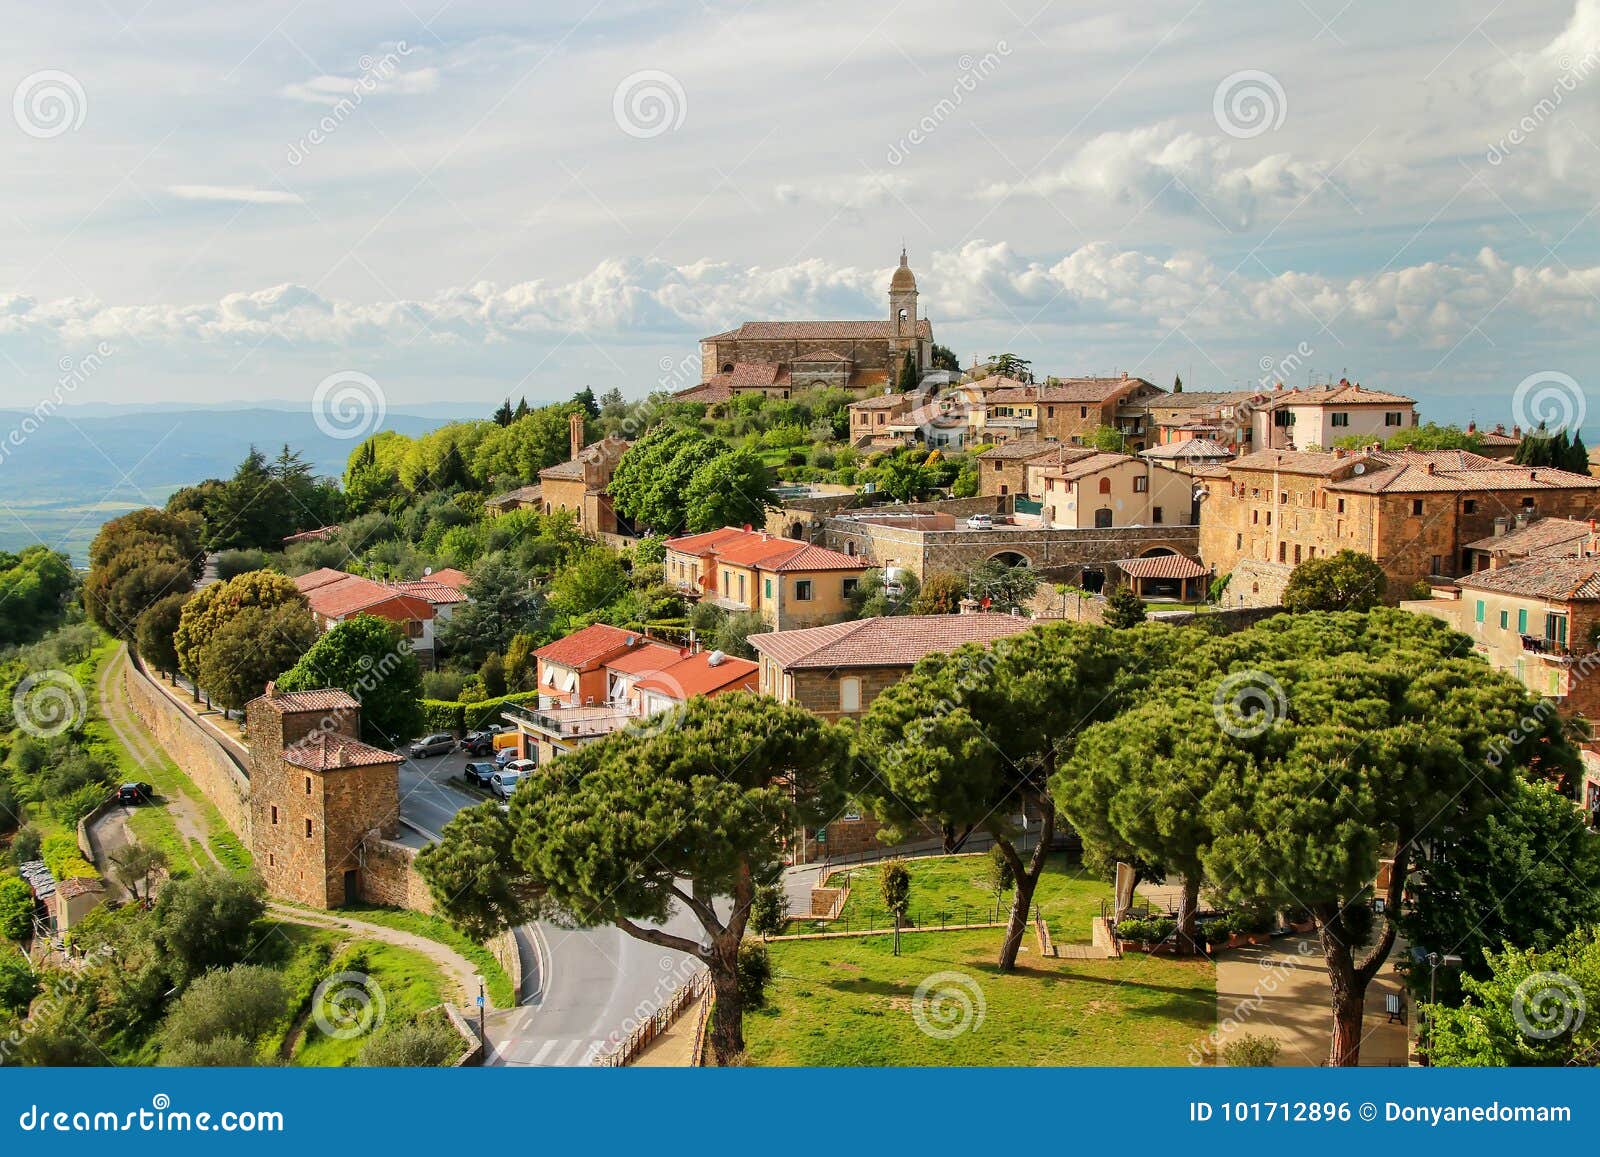 view of montalcino town from the fortress in val d`orcia, tuscan